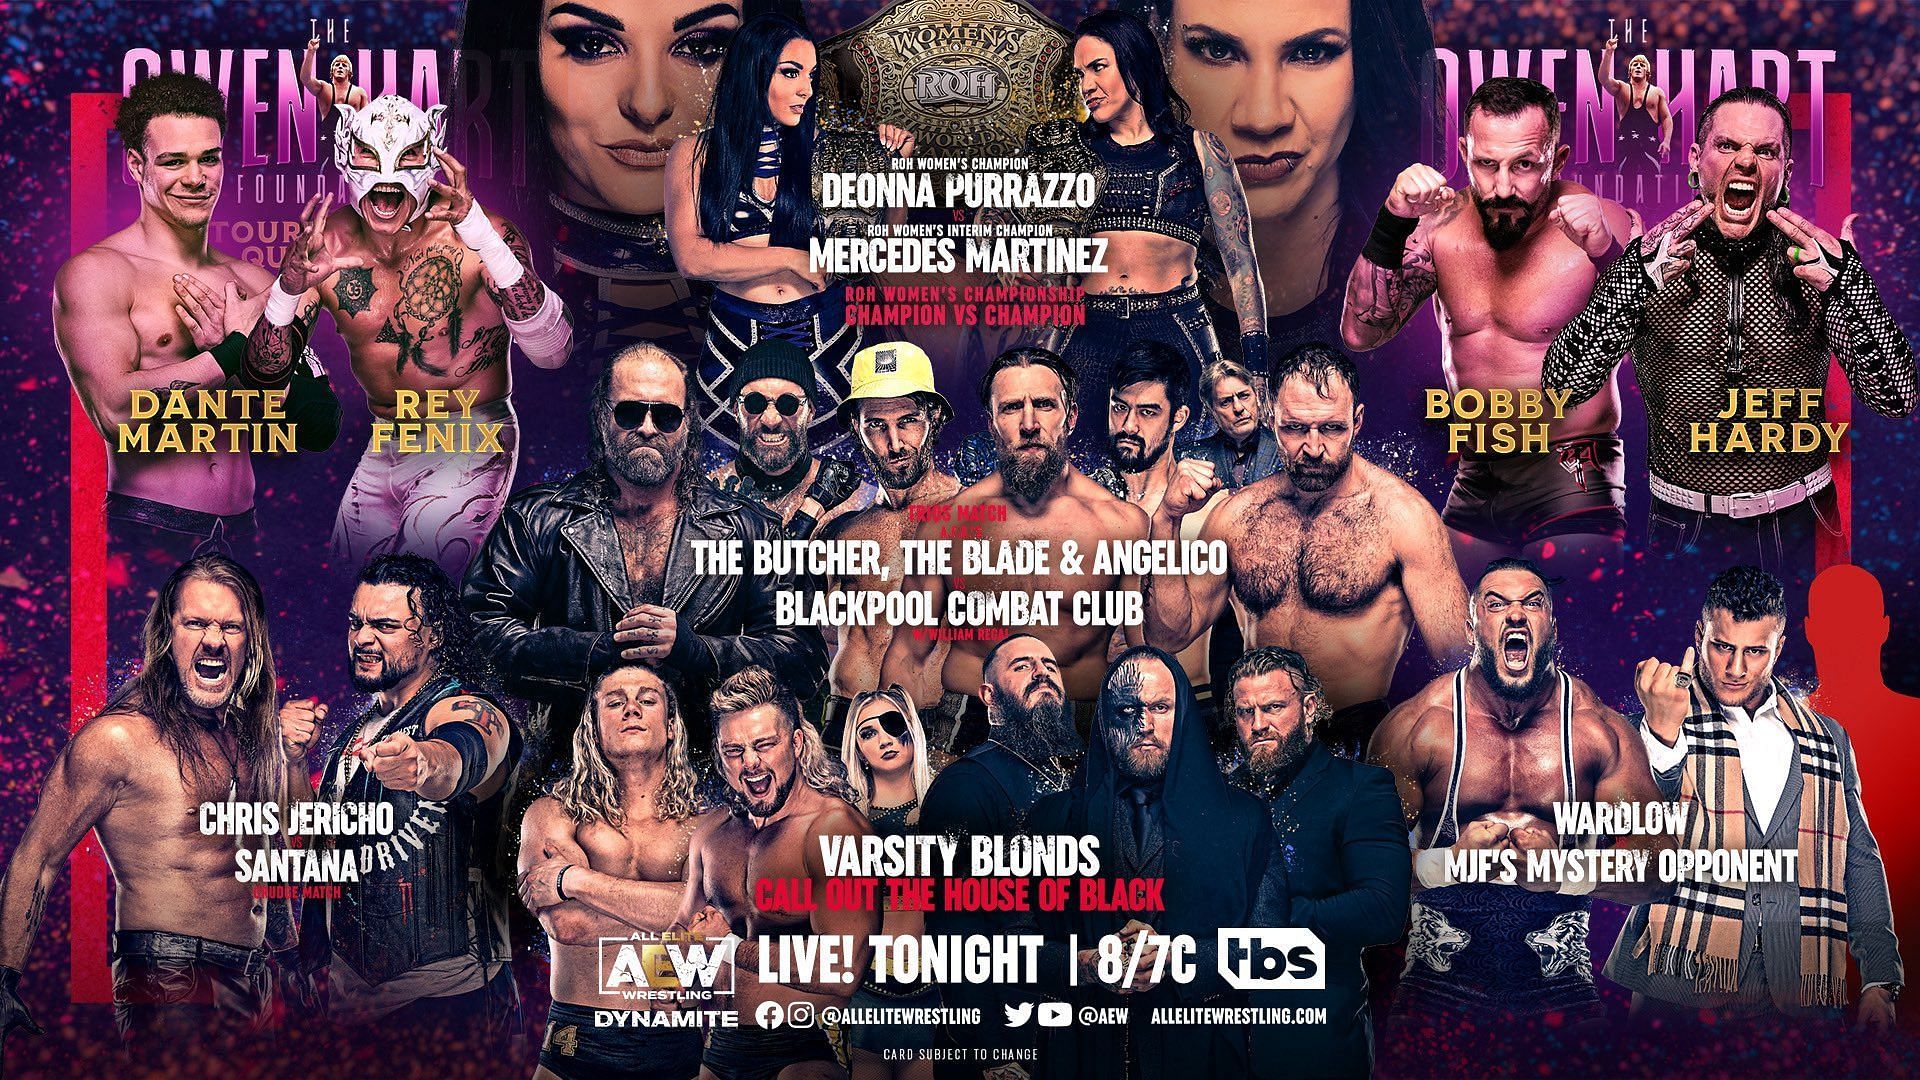 The AEW Dynamite card was stacked once again this week